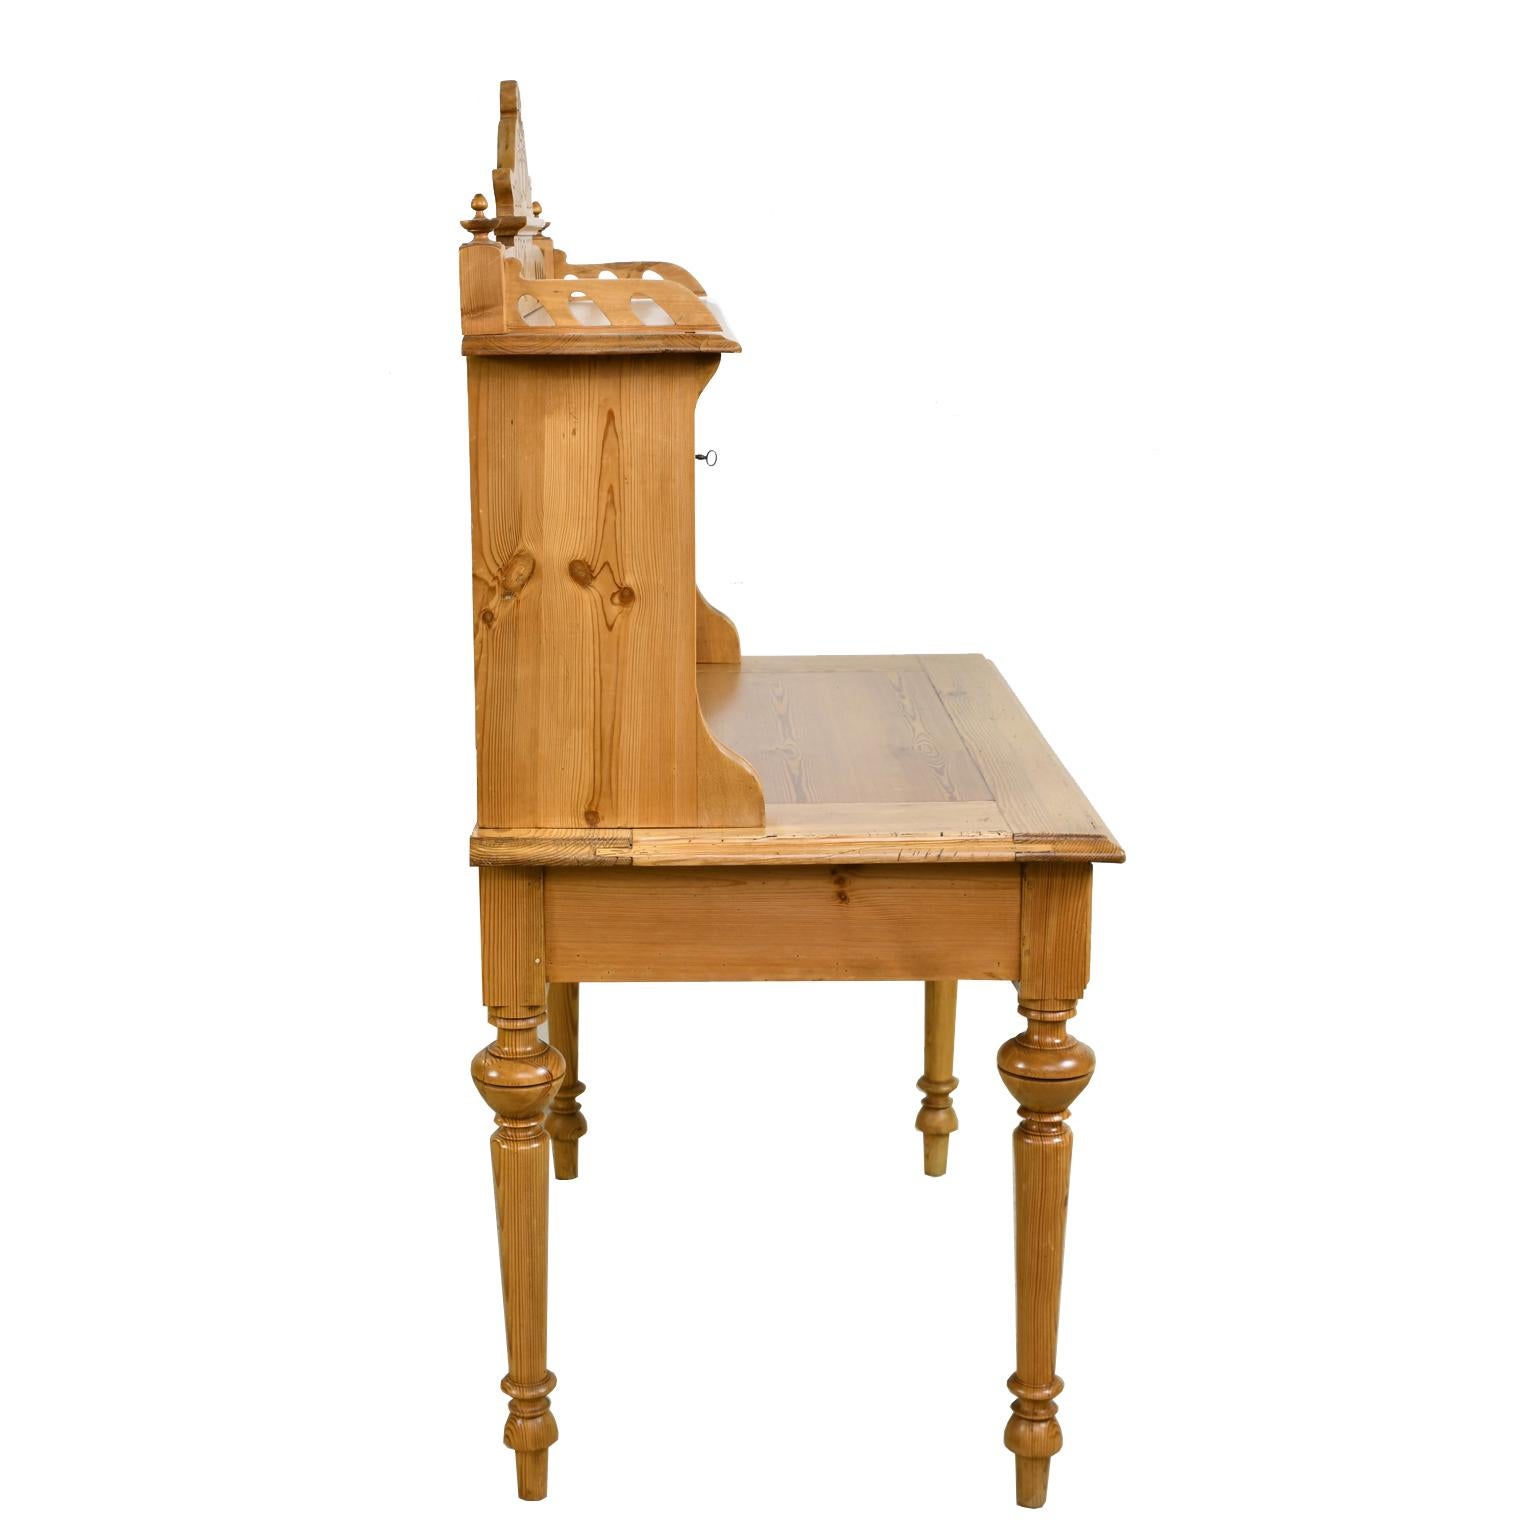 Antique 19th Century German Jugendstil/ Art Nouveau Writing Desk in Pine In Good Condition For Sale In Miami, FL